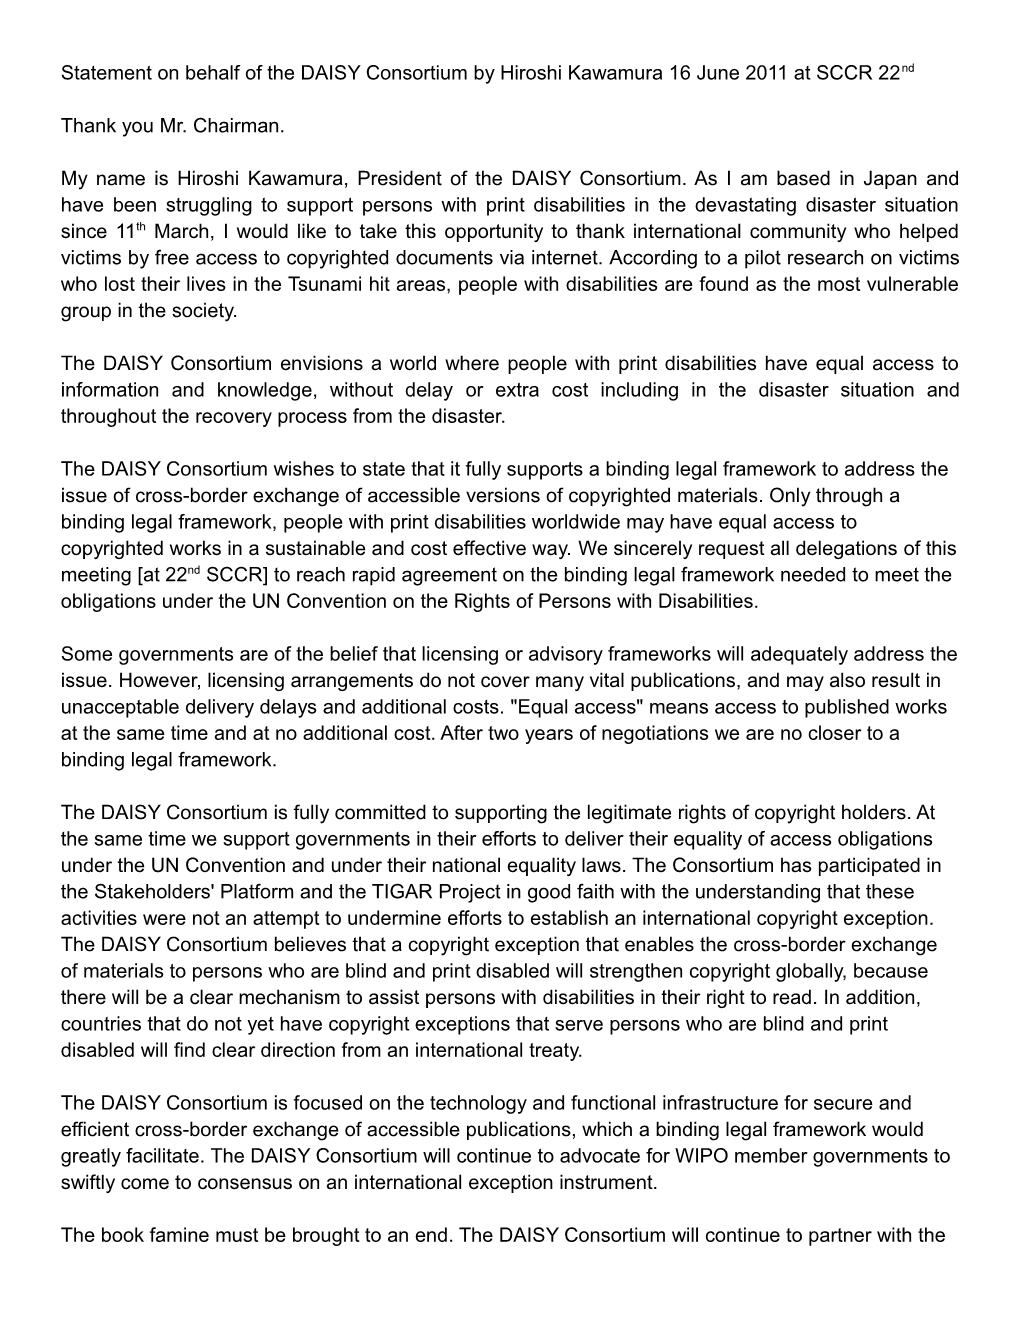 Statement on Behalf of the DAISY Consortium by Hiroshi Kawamura 16 June 2011 at SCCR 22Nd